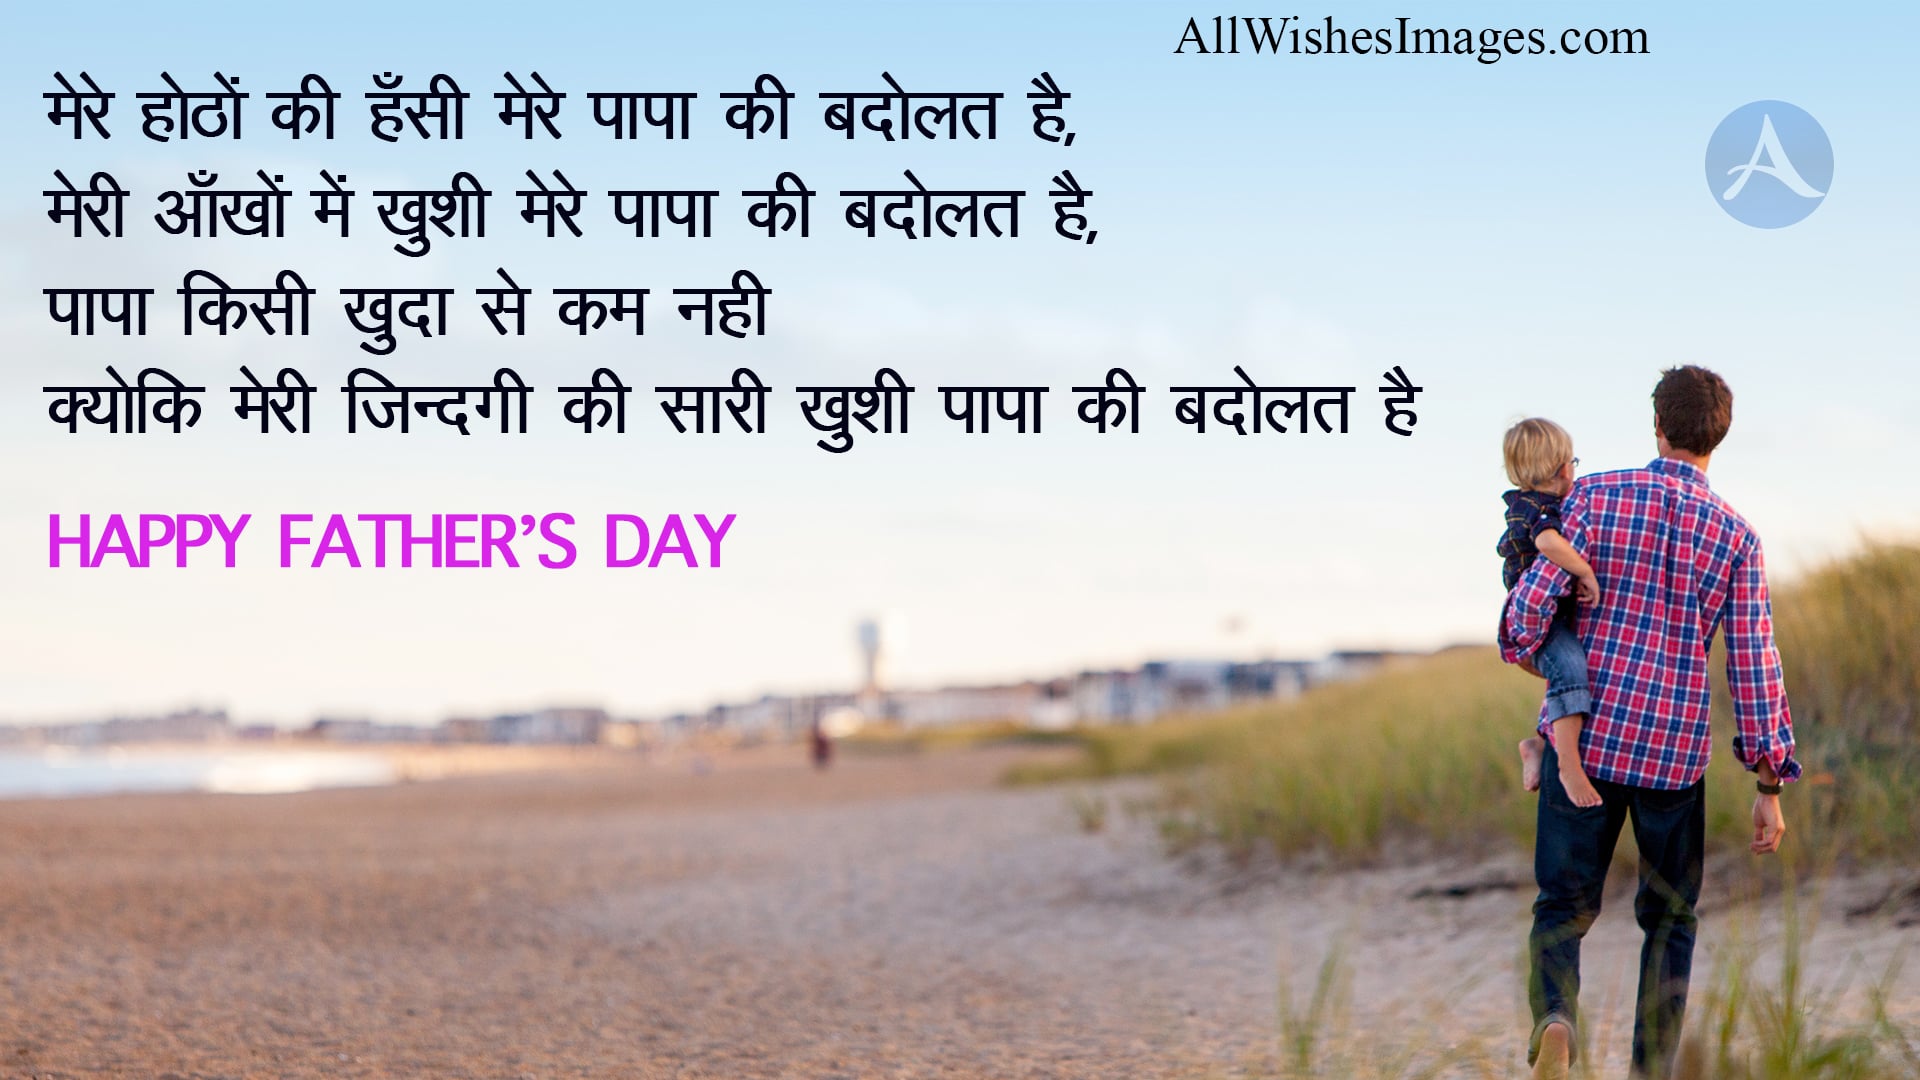 happy father's day images in hindi - All Wishes Images - Images for WhatsApp